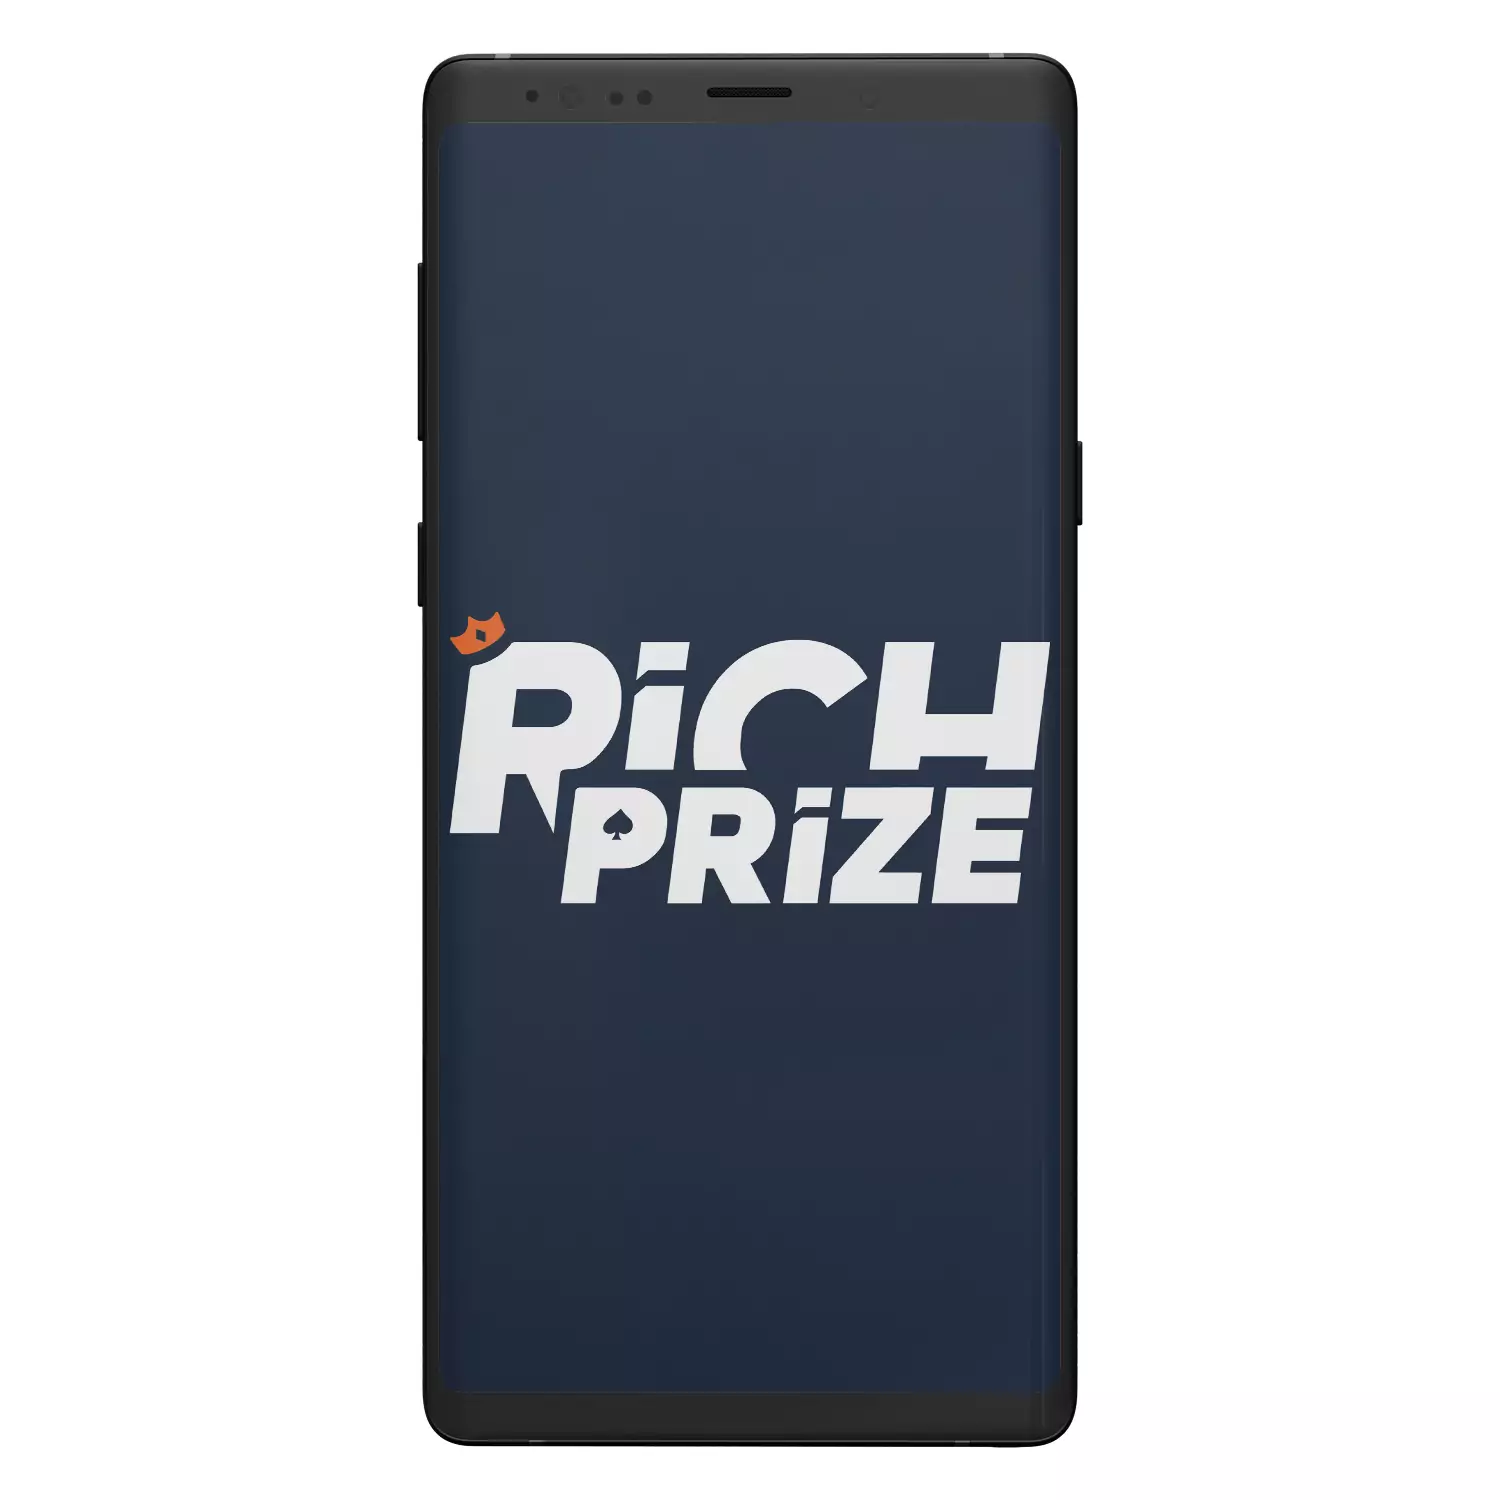 Bet on cricket online in the mobile version of Richprize.